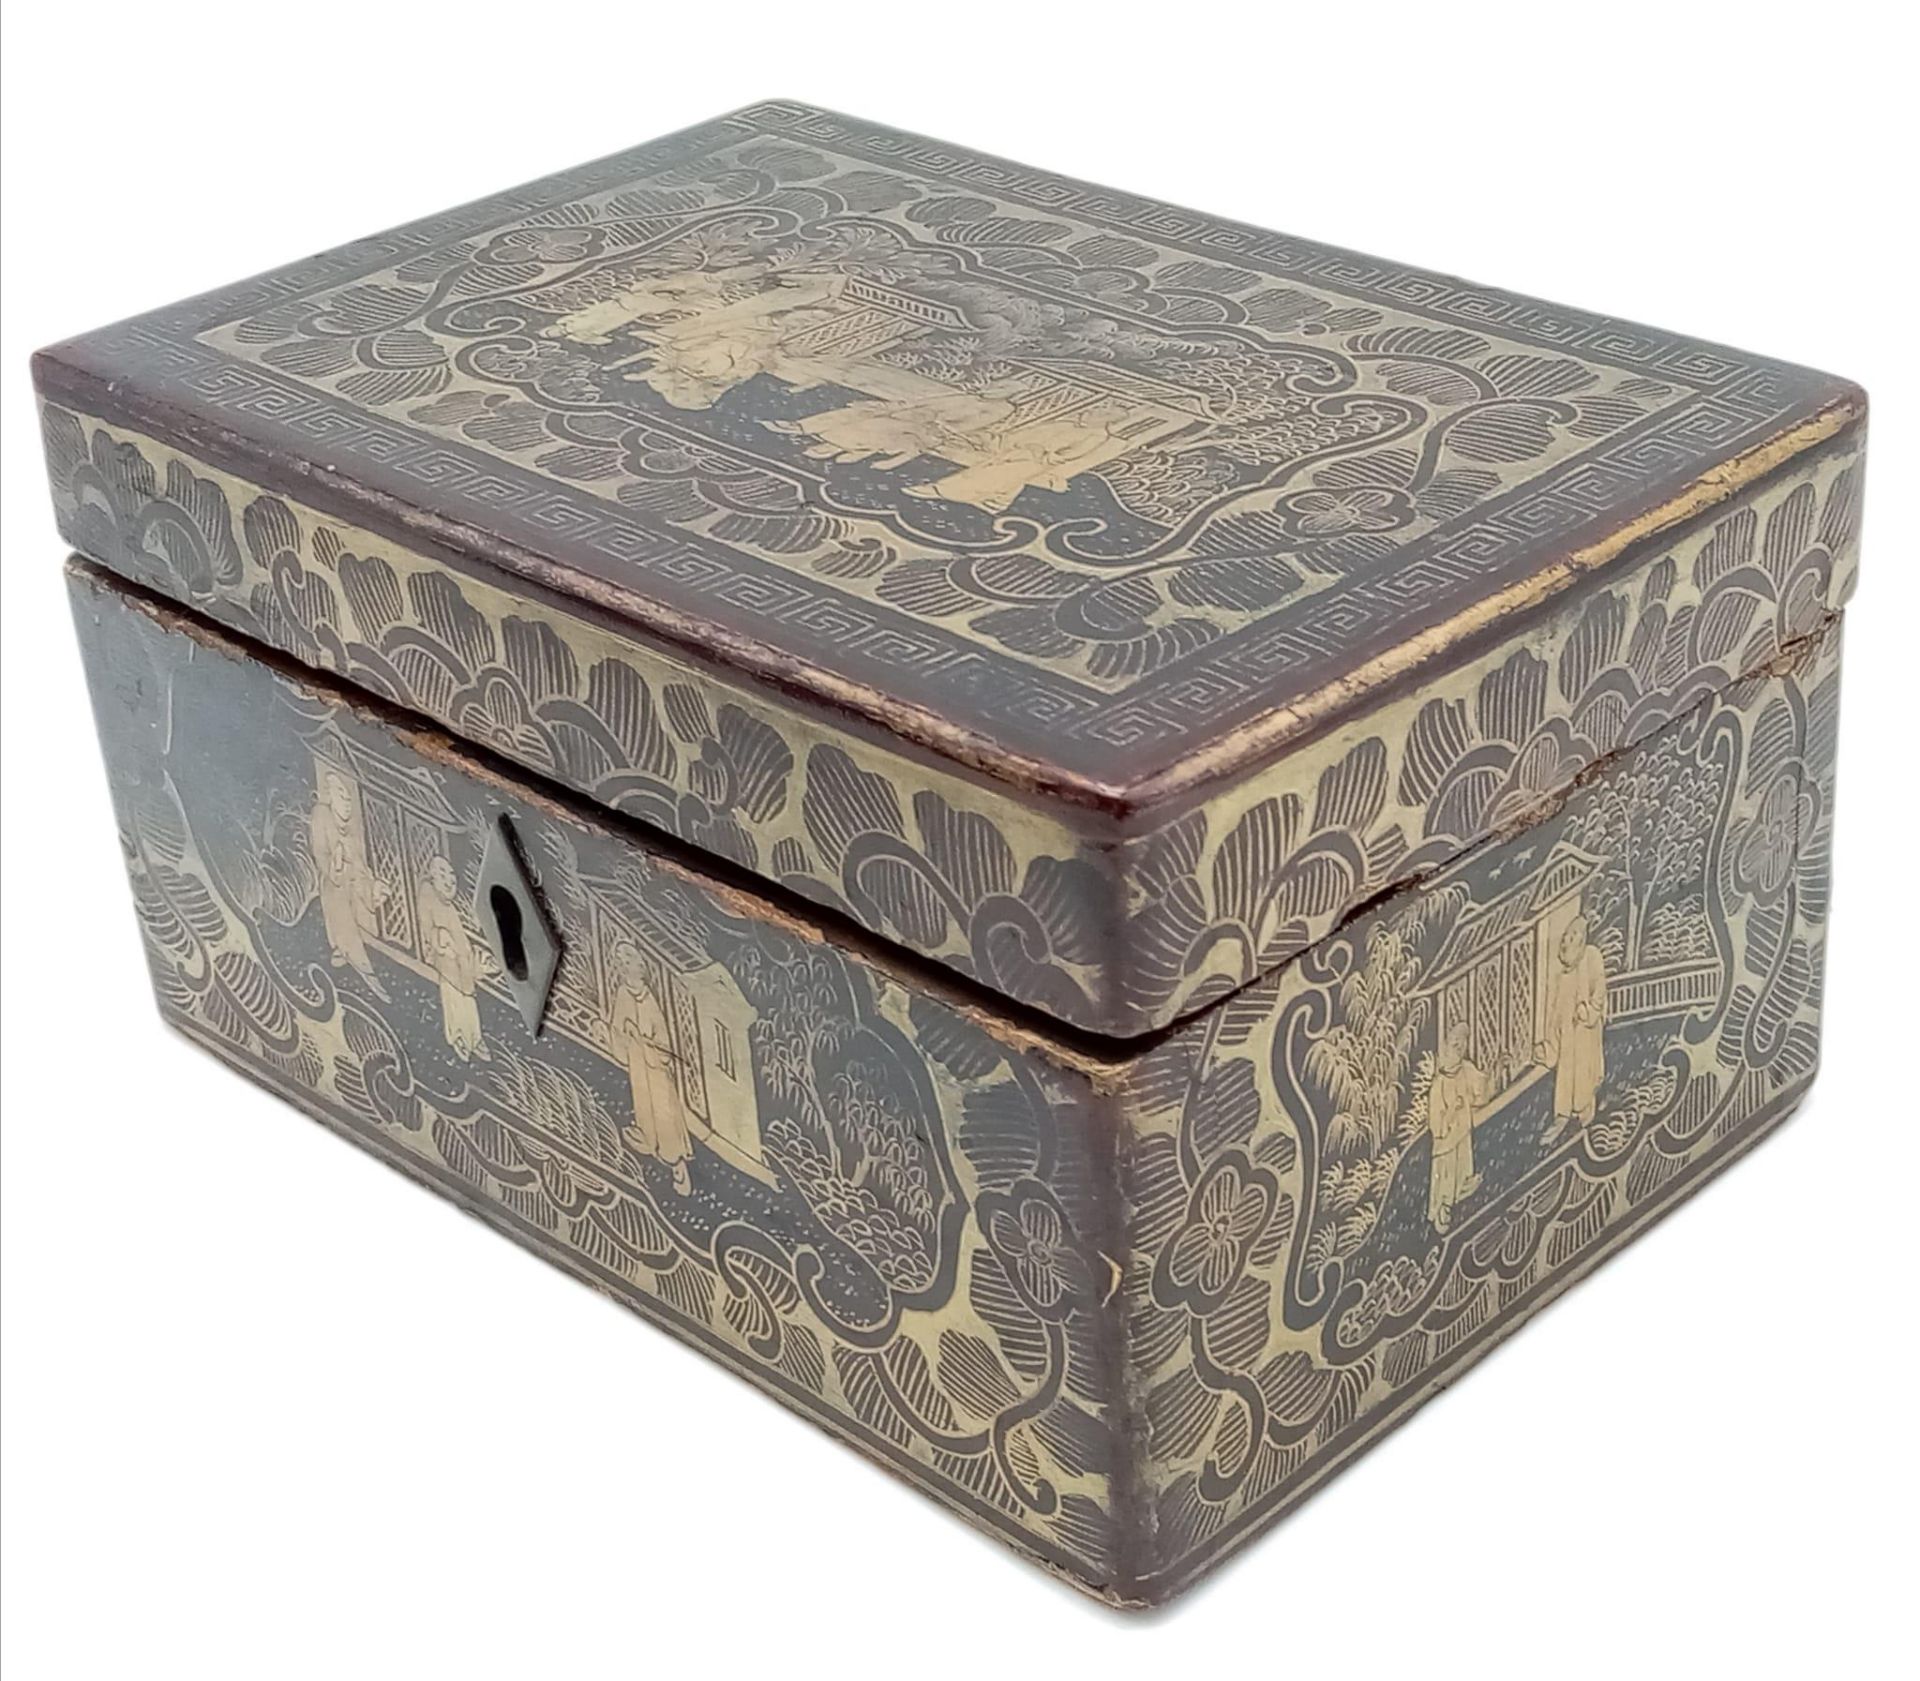 An Antique, Late 18th Century Chinese Lacquer Tea Caddy/Jewellery Box. Wonderful gilding depicting - Image 2 of 4